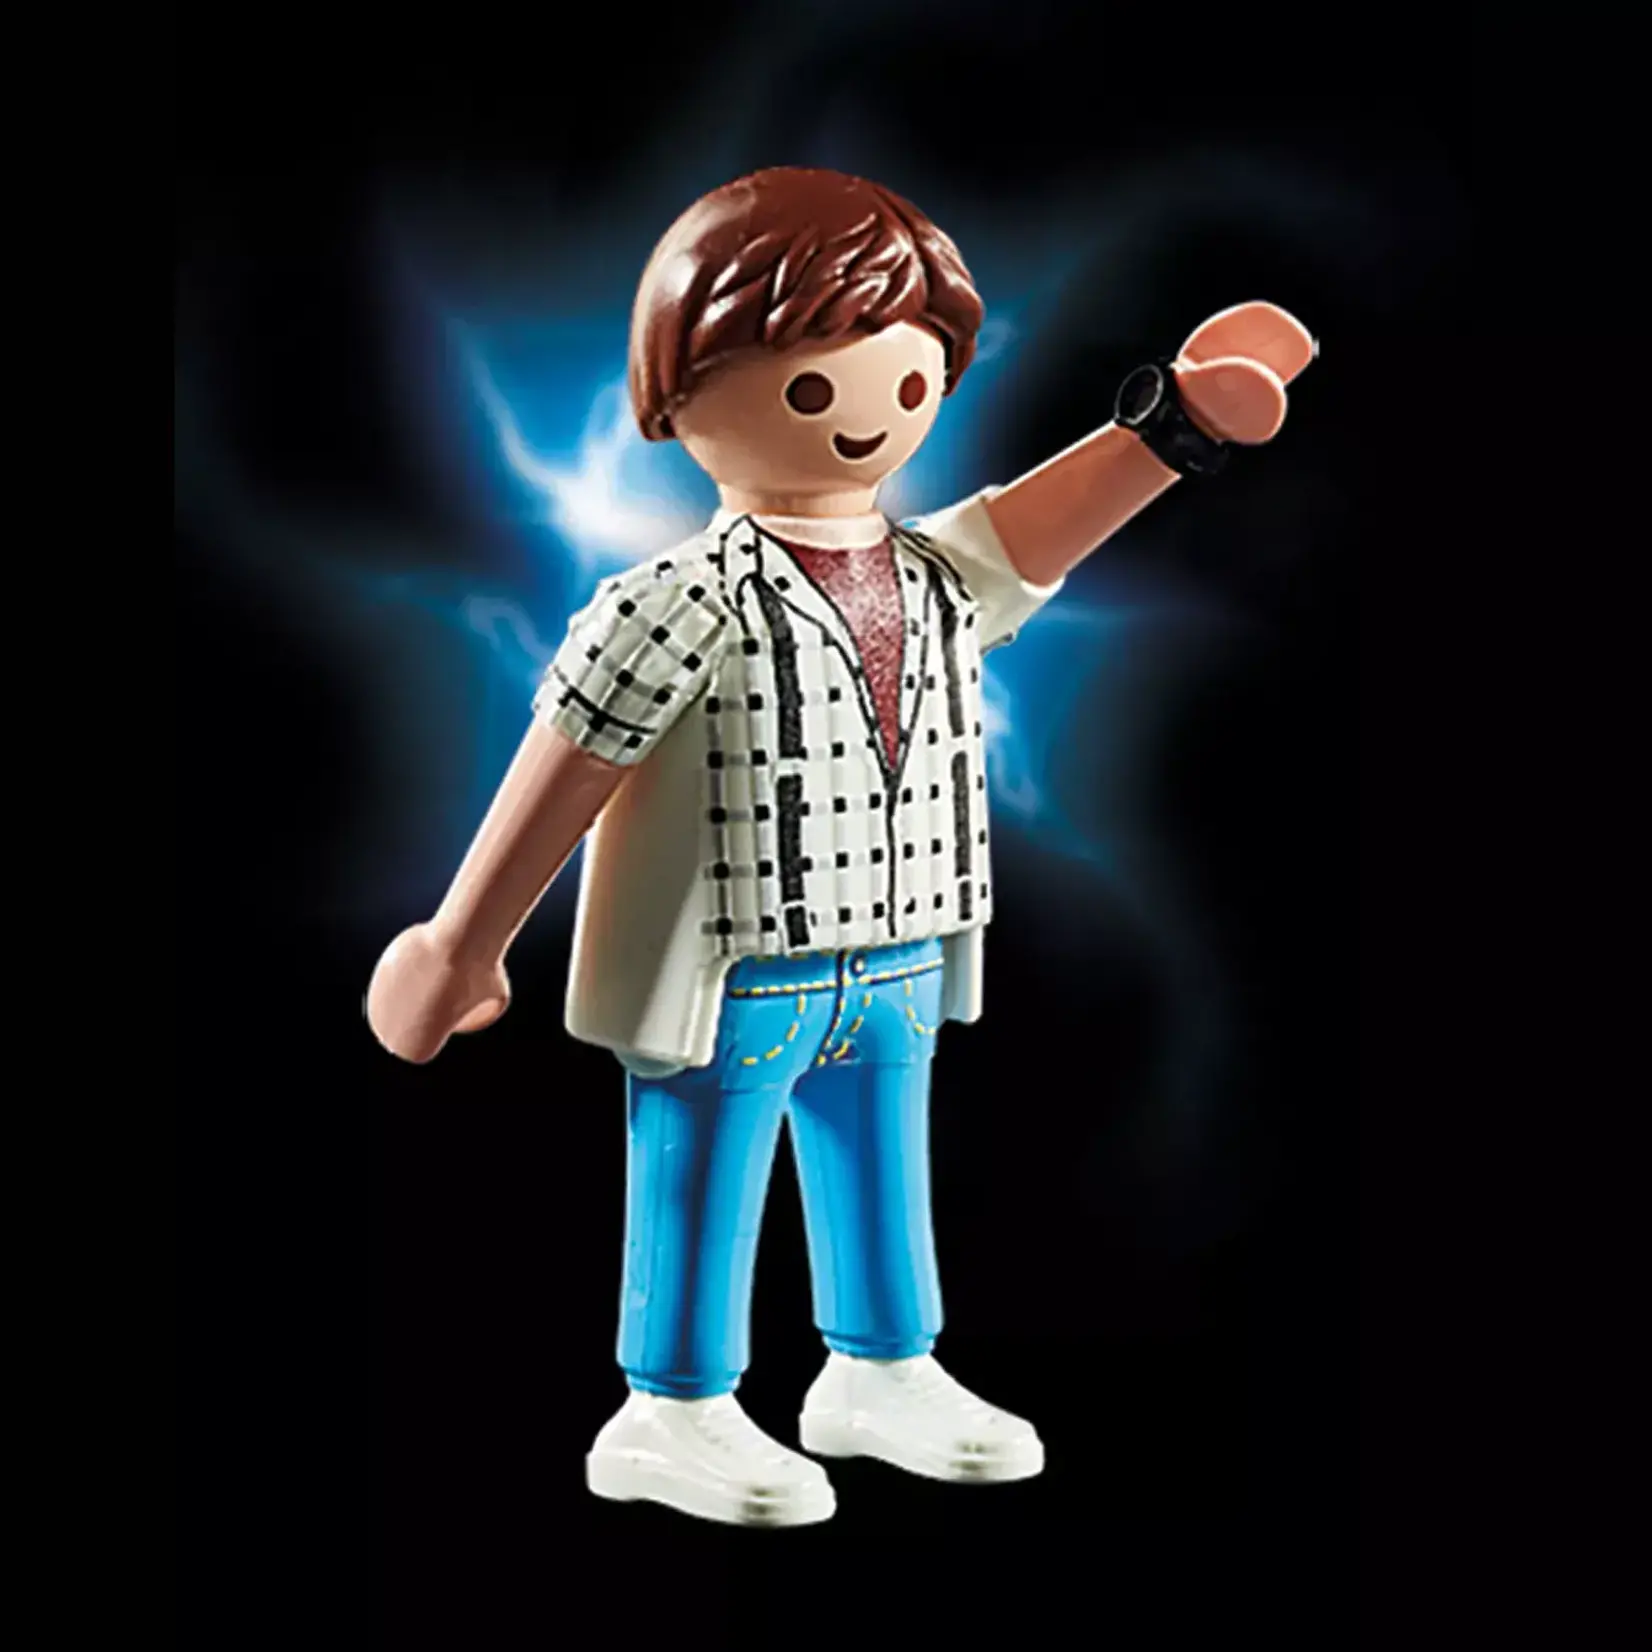 Playmobil *****Playmobil Back to the Future 70633 - Pick-up de Marty